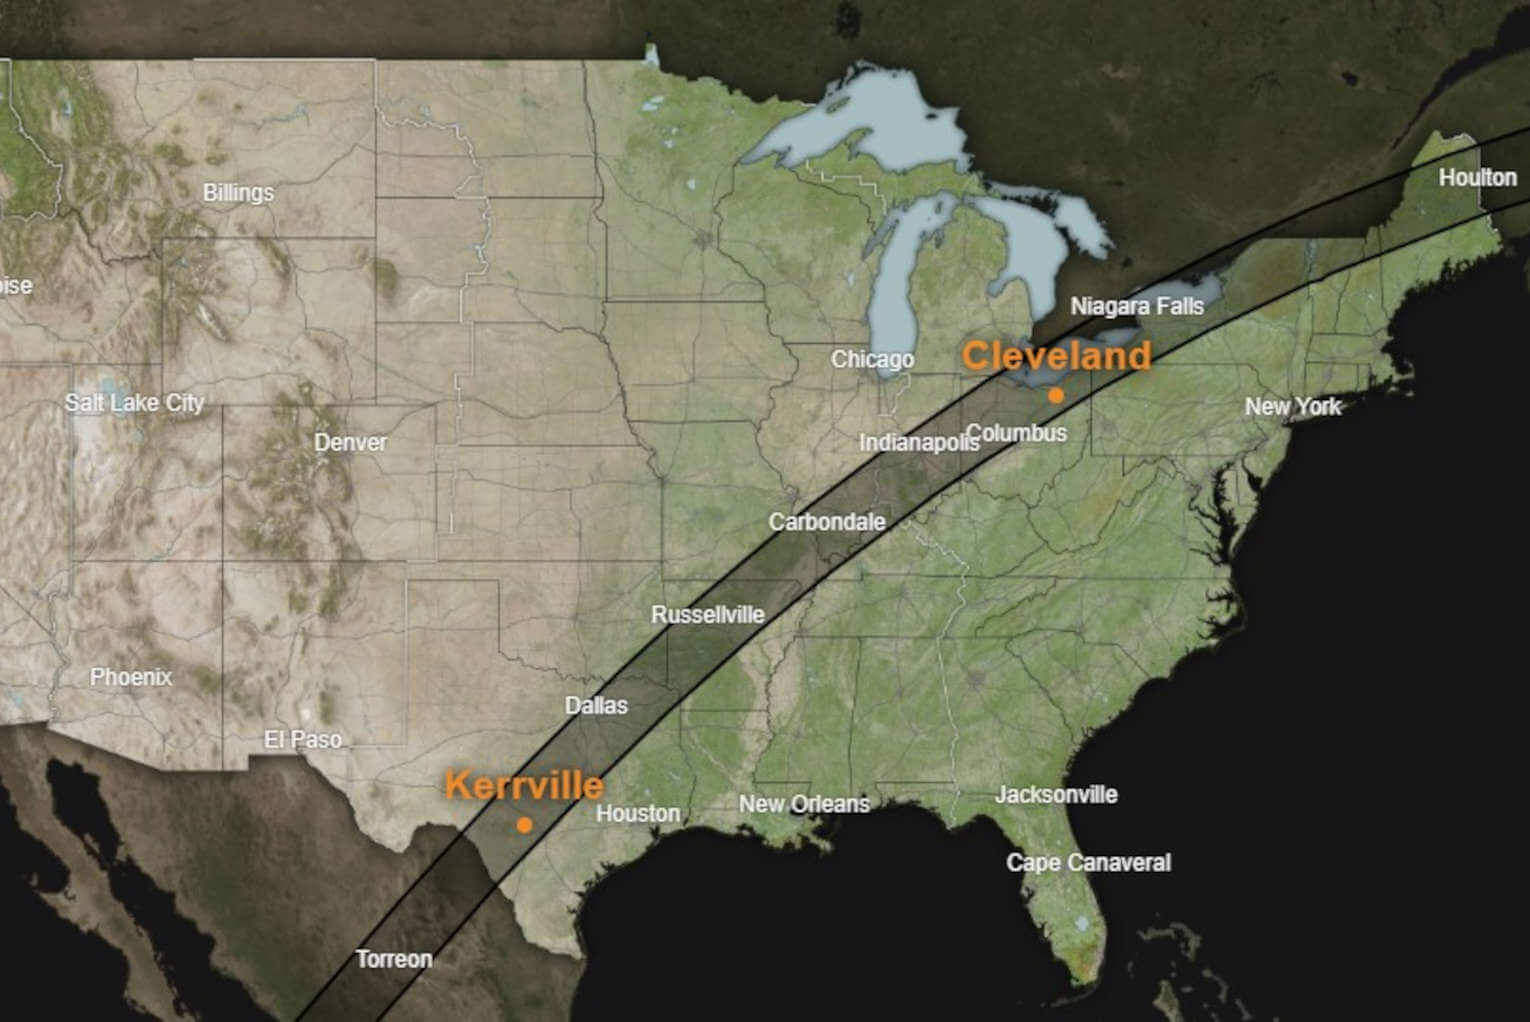 Eclipse Weather Forecast: Clouds Could Spoil View along Much of Eclipse Path